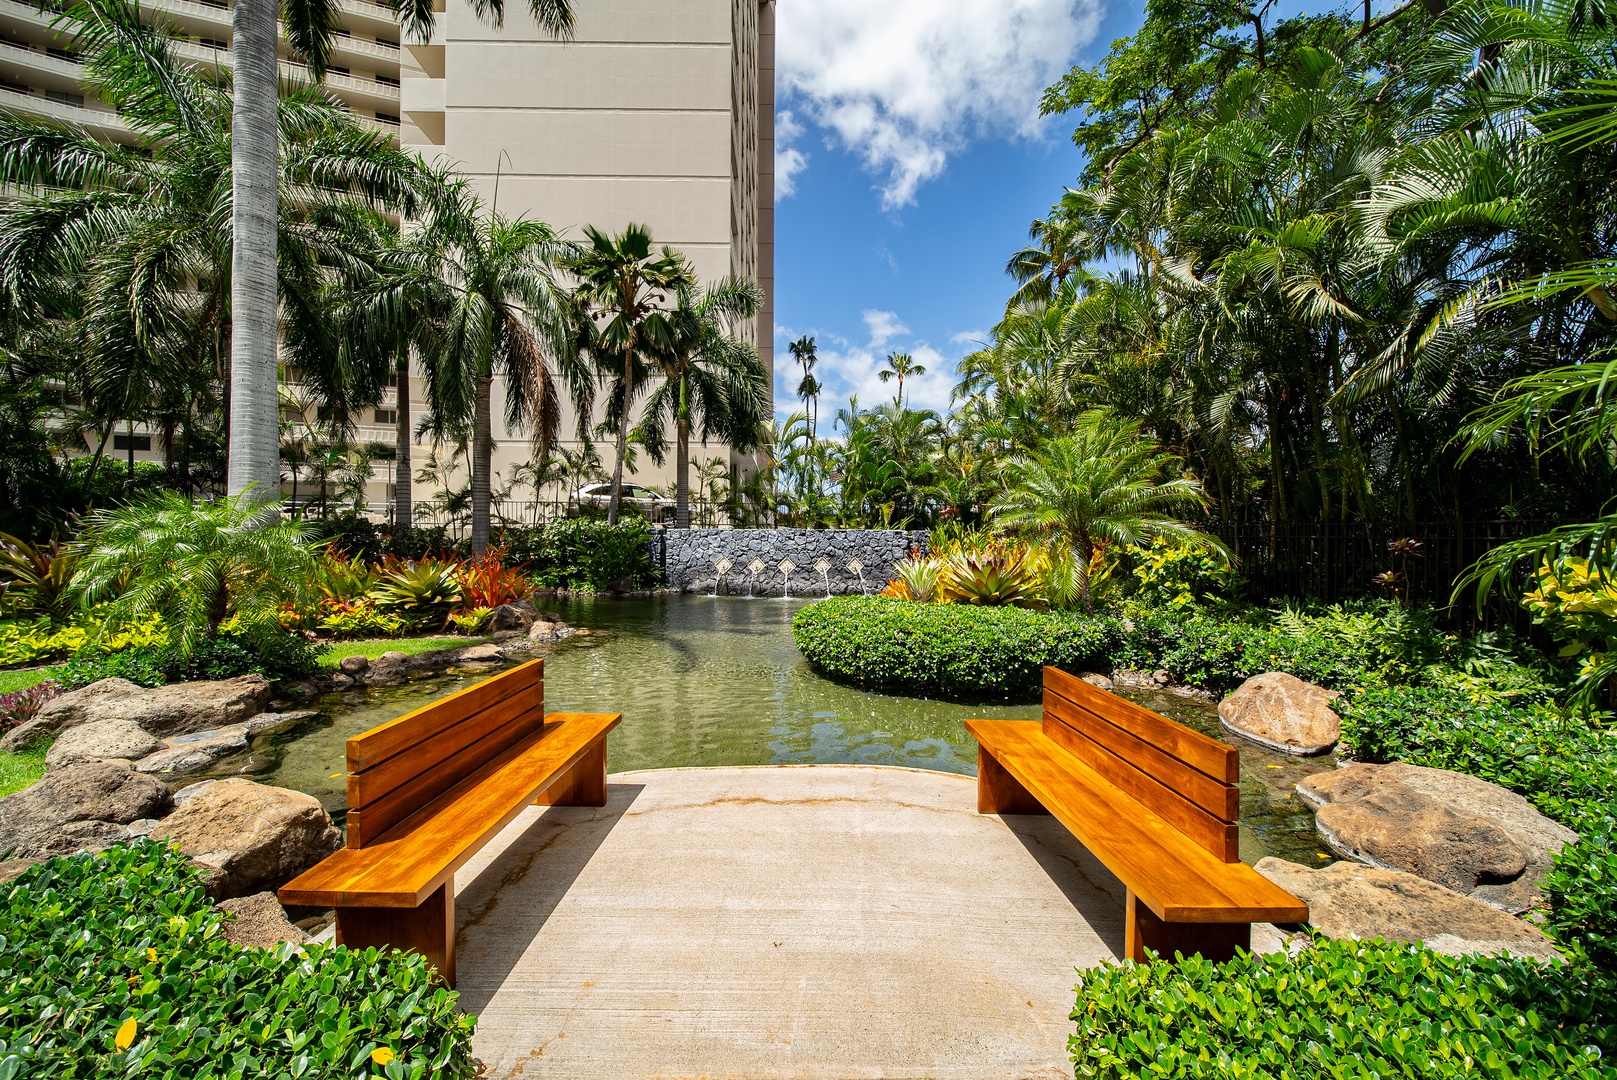 Honolulu Vacation Rentals, Watermark Waikiki Unit 901 - The community garden, a perfect spot for your morning strolls.